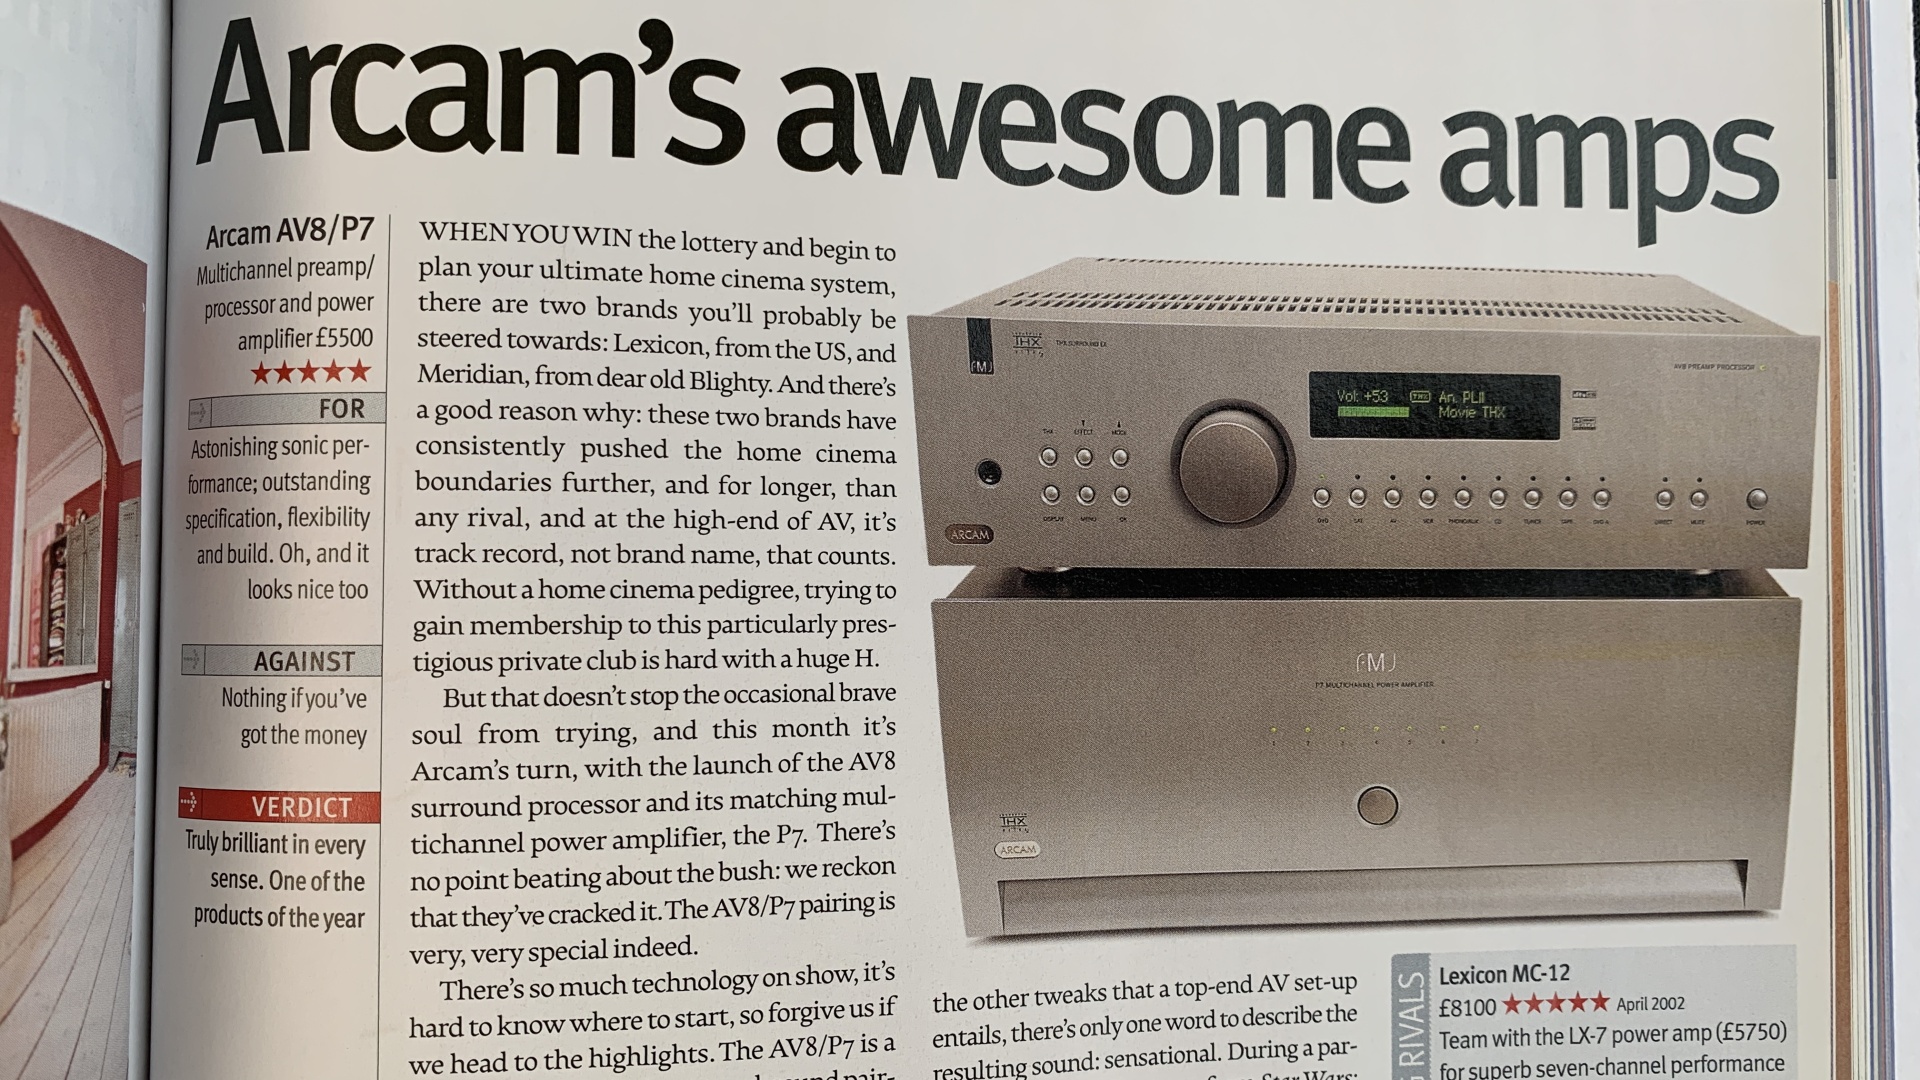 10-of-the-best-arcam-products-of-all-time